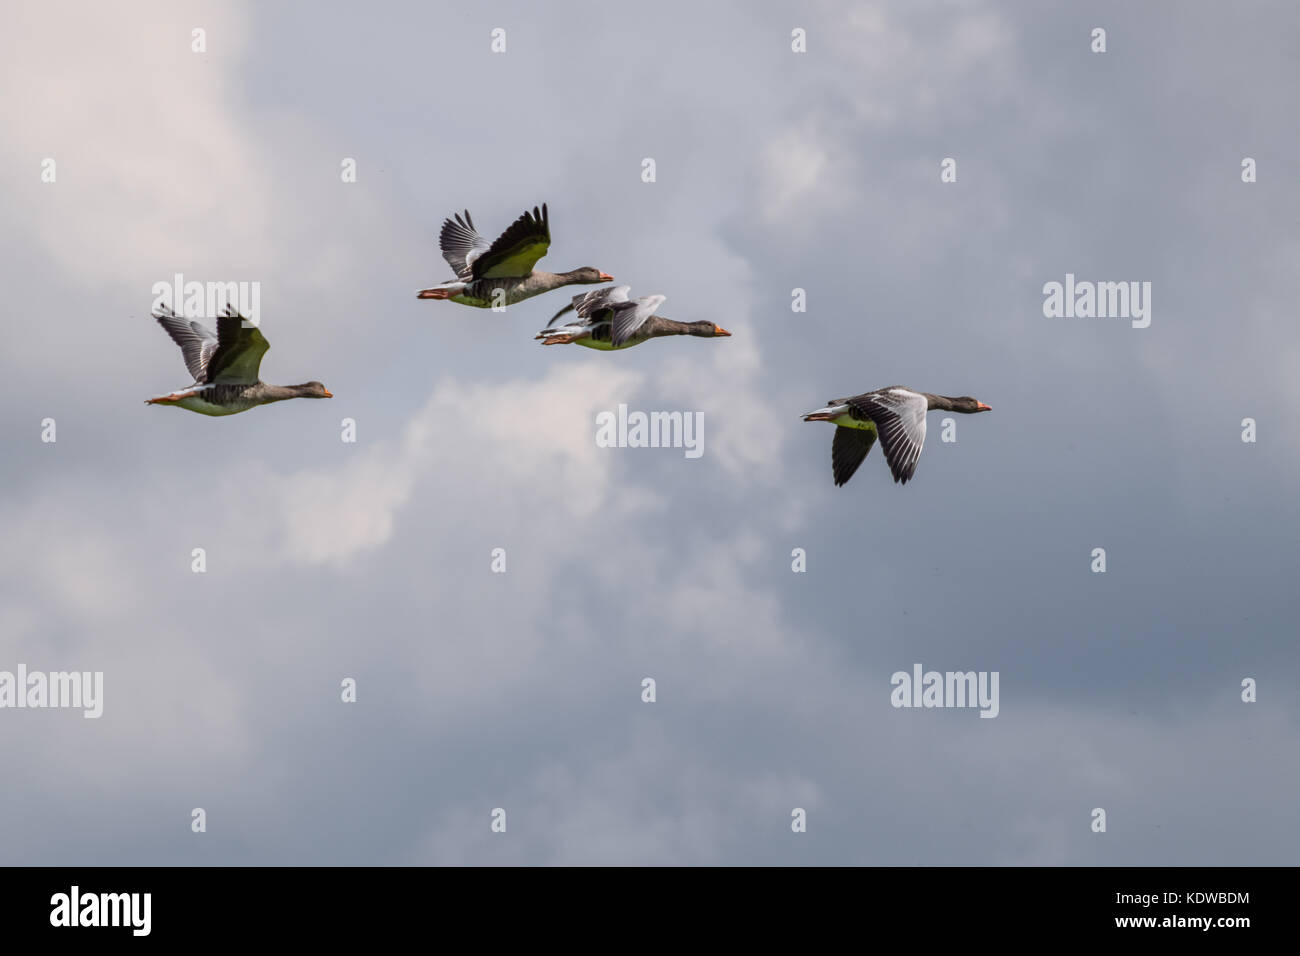 Flying geese bird cloudy sky in the netherlands Stock Photo